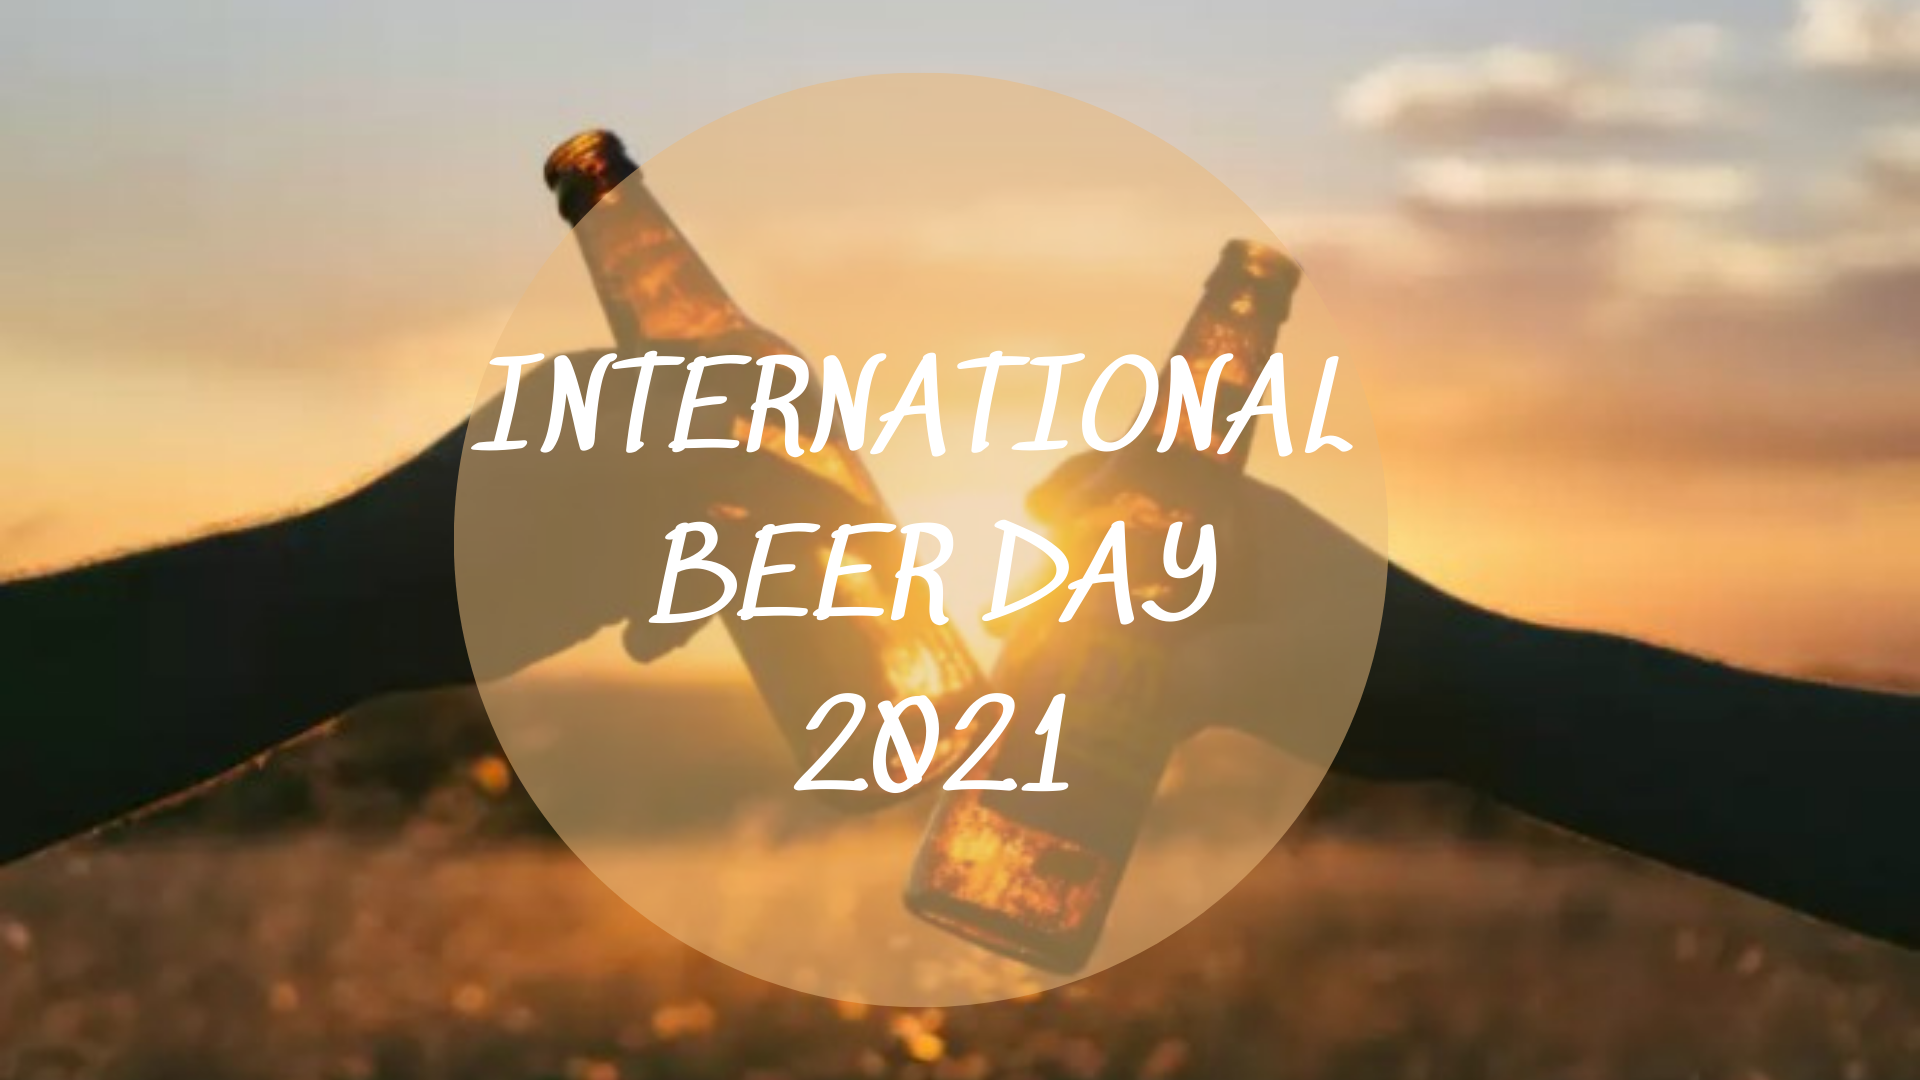 International Beer Day: History, Significance and Celebration